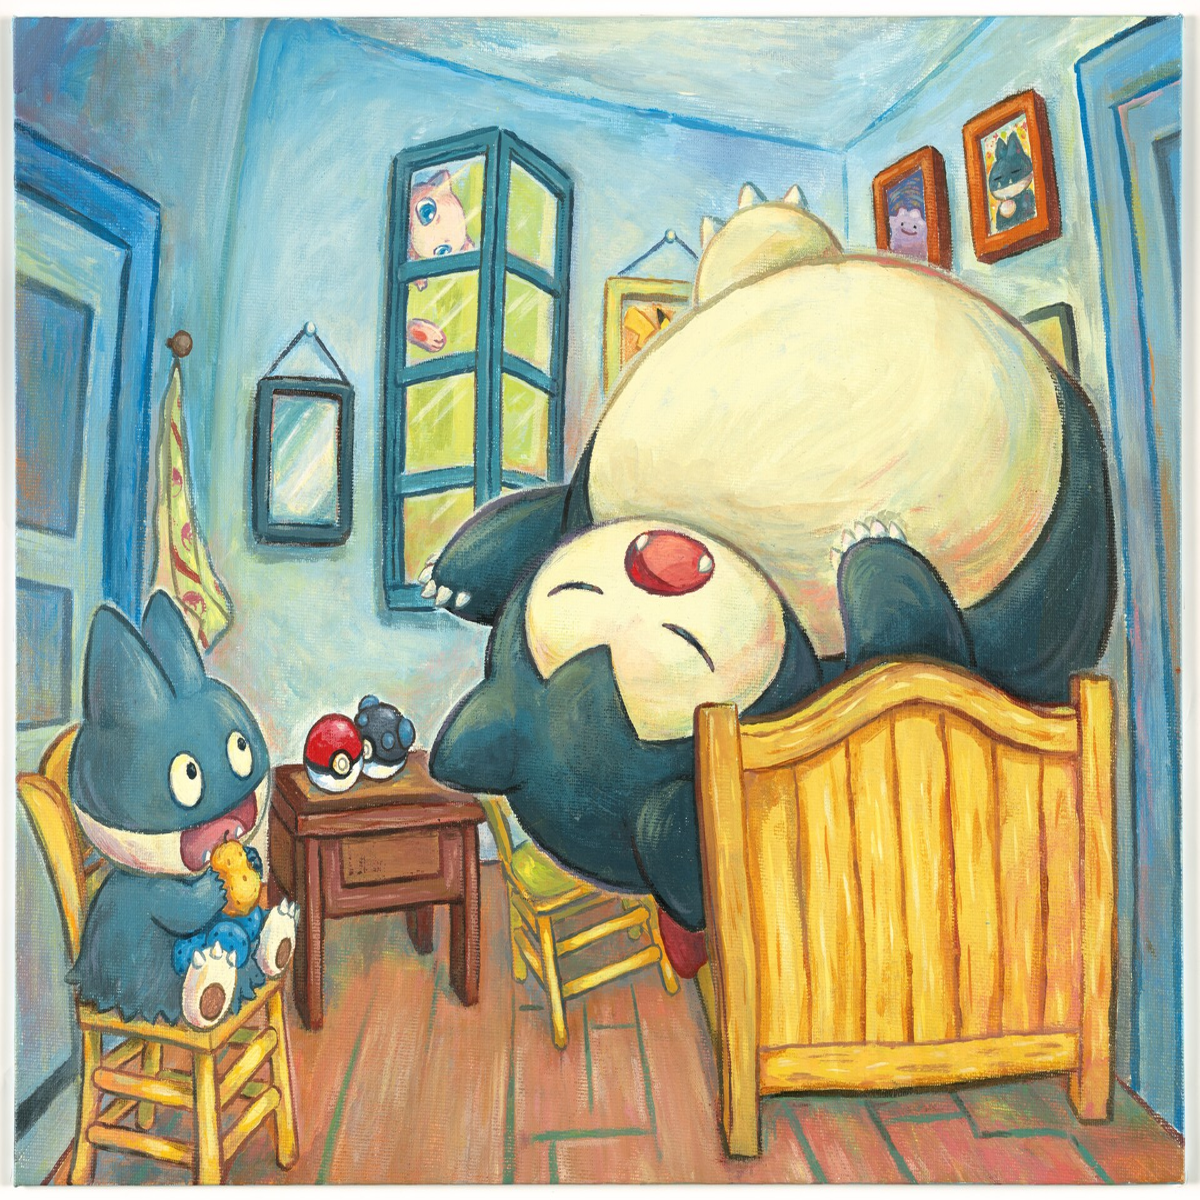 https://assetsio.reedpopcdn.com/Pokemon_x_Van_Gogh_Museum_-_Snorlax_Munchlax_inspired_by_The_Bedroom_png_jpgcopy.jpg?width=1200&height=1200&fit=crop&quality=100&format=png&enable=upscale&auto=webp